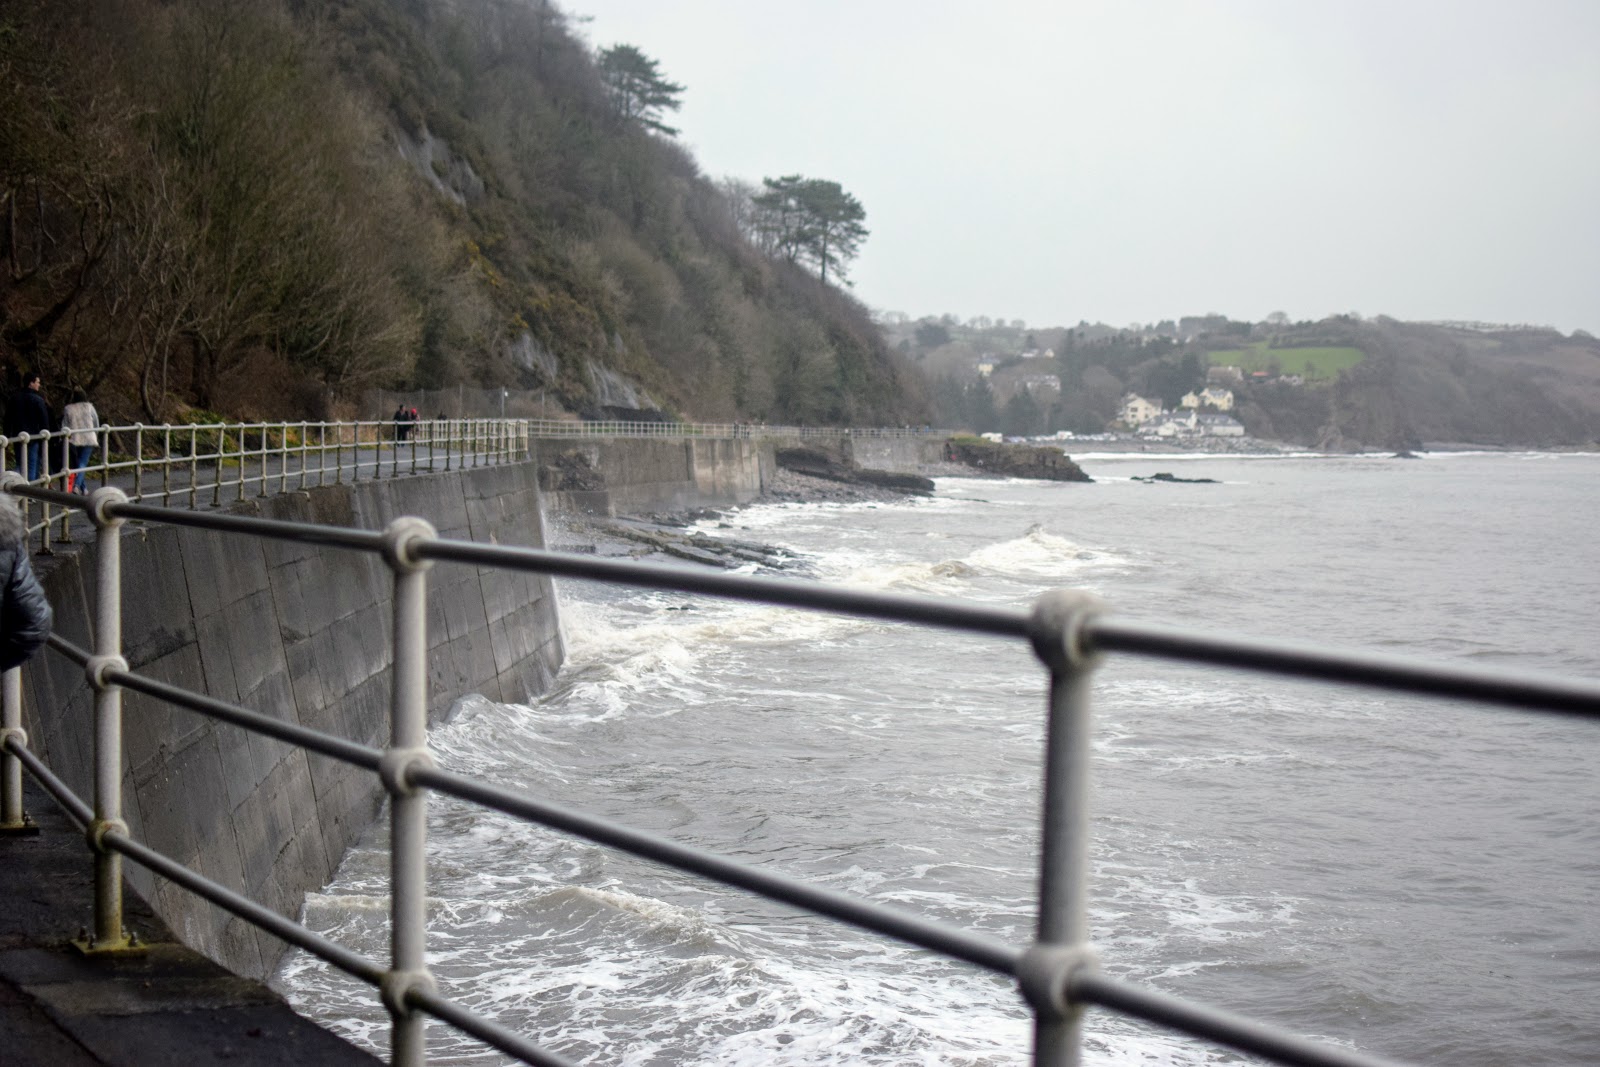 , Days Out:  Snapshots of the Saundersfoot Tunnel Walks, Pembrokeshire